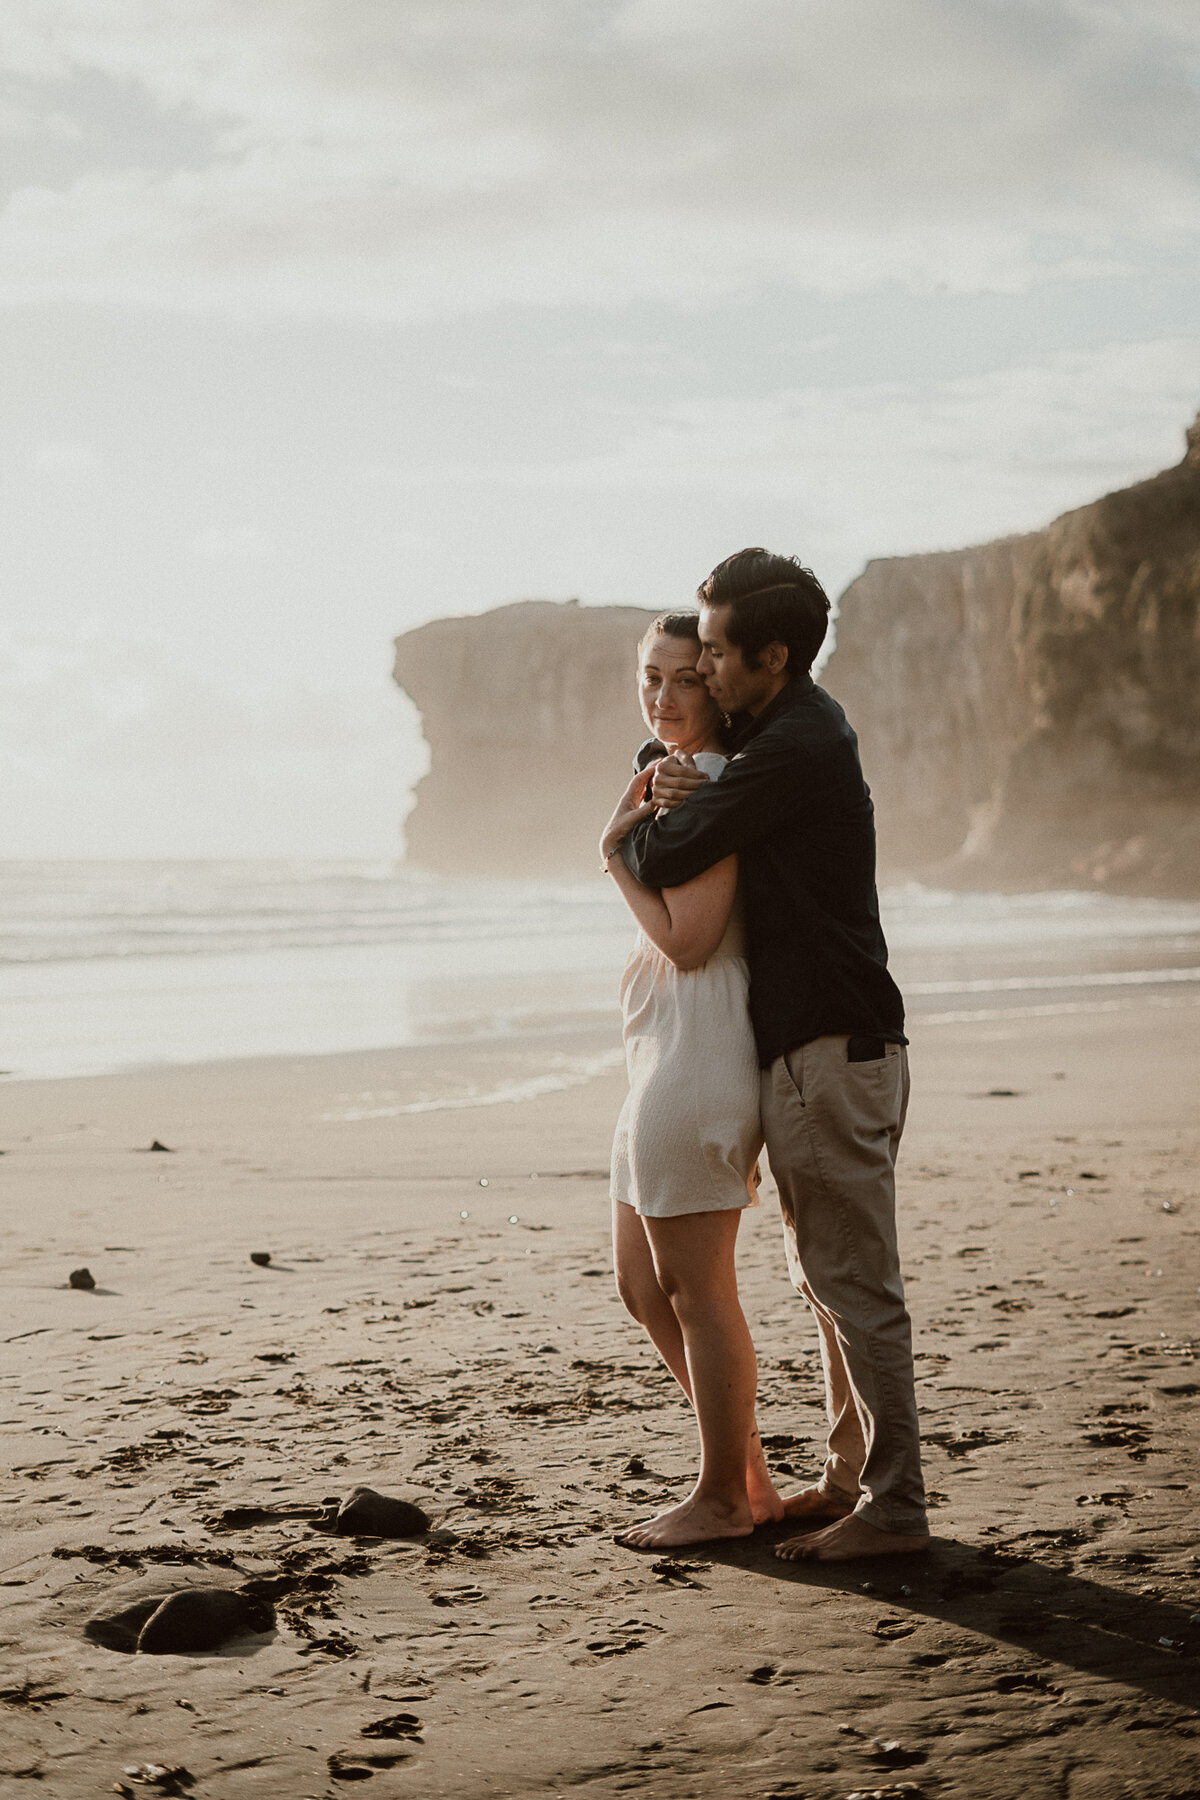 Wedding photographer based in Auckland and available throughout New Zealand to capture your magic love stories